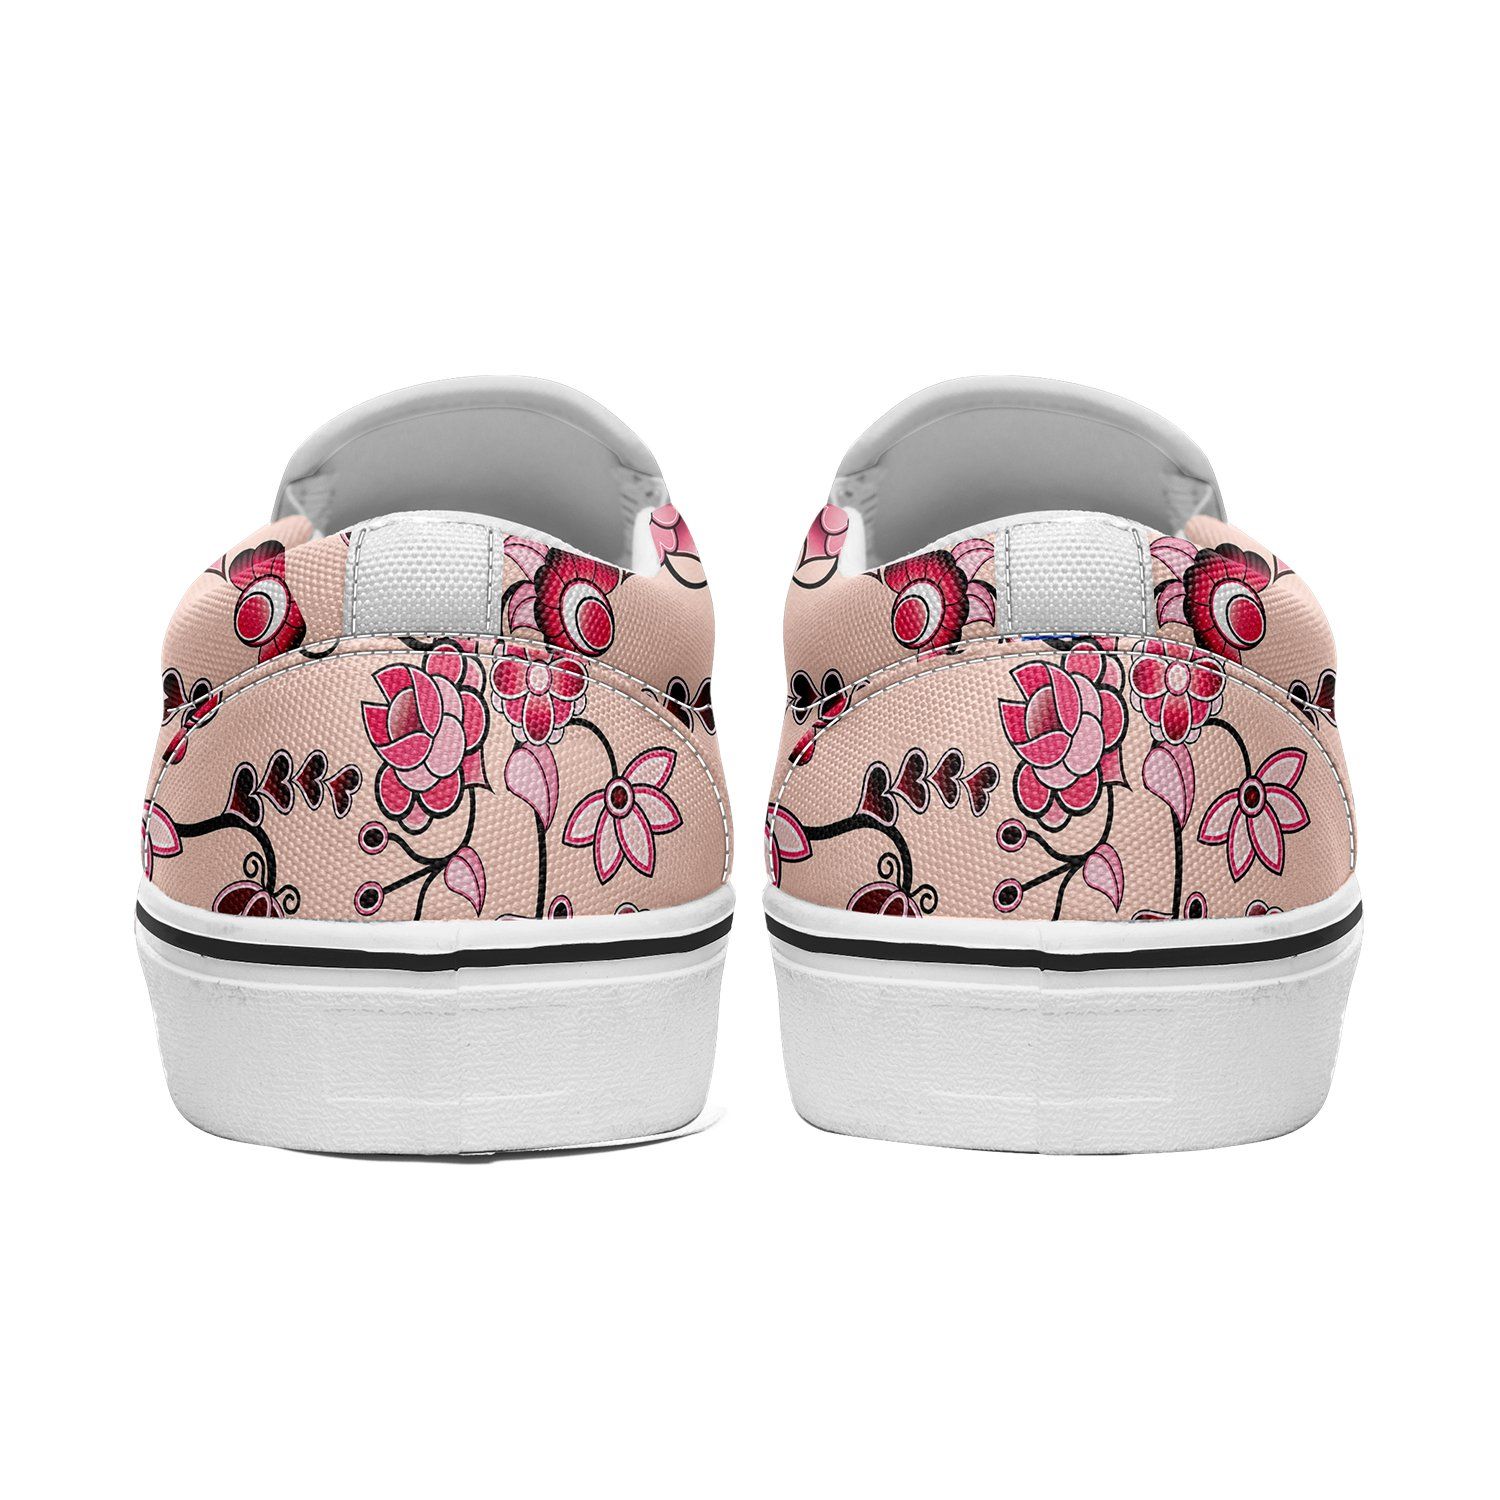 Floral Amour Otoyimm Canvas Slip On Shoes otoyimm Herman 